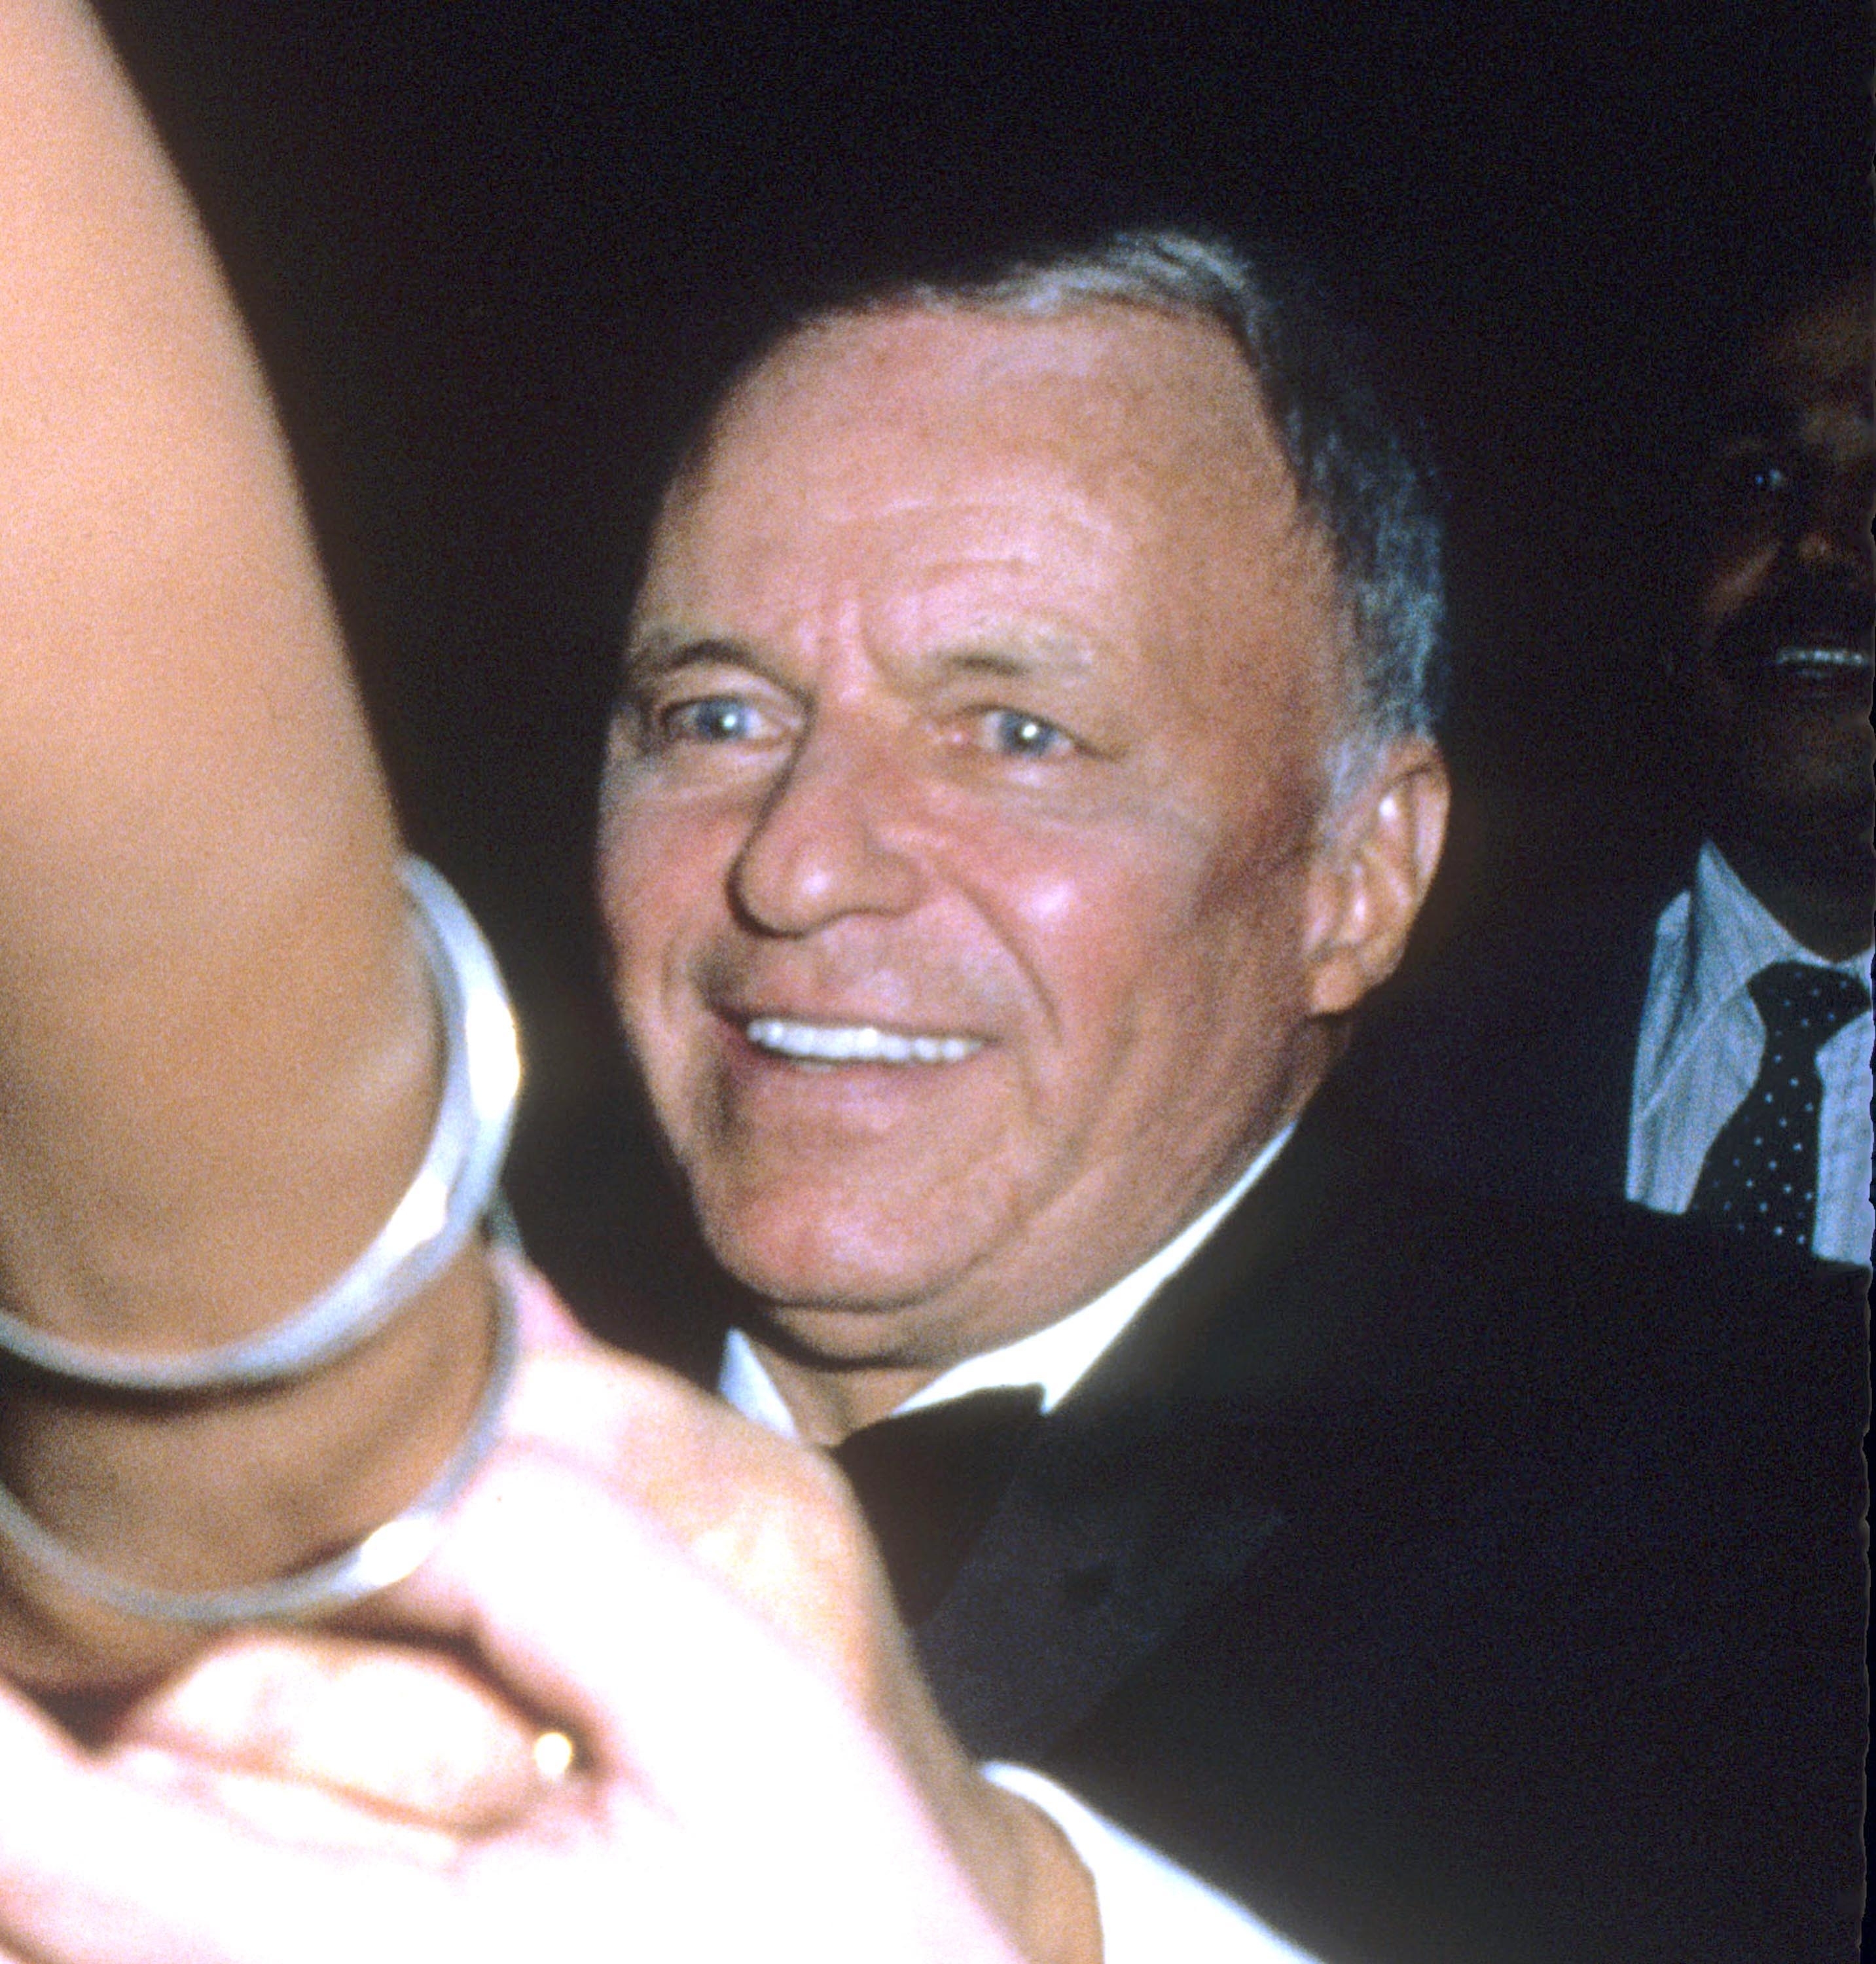 Frank Sinatra smiling, wearing a tuxedo in a crowded event